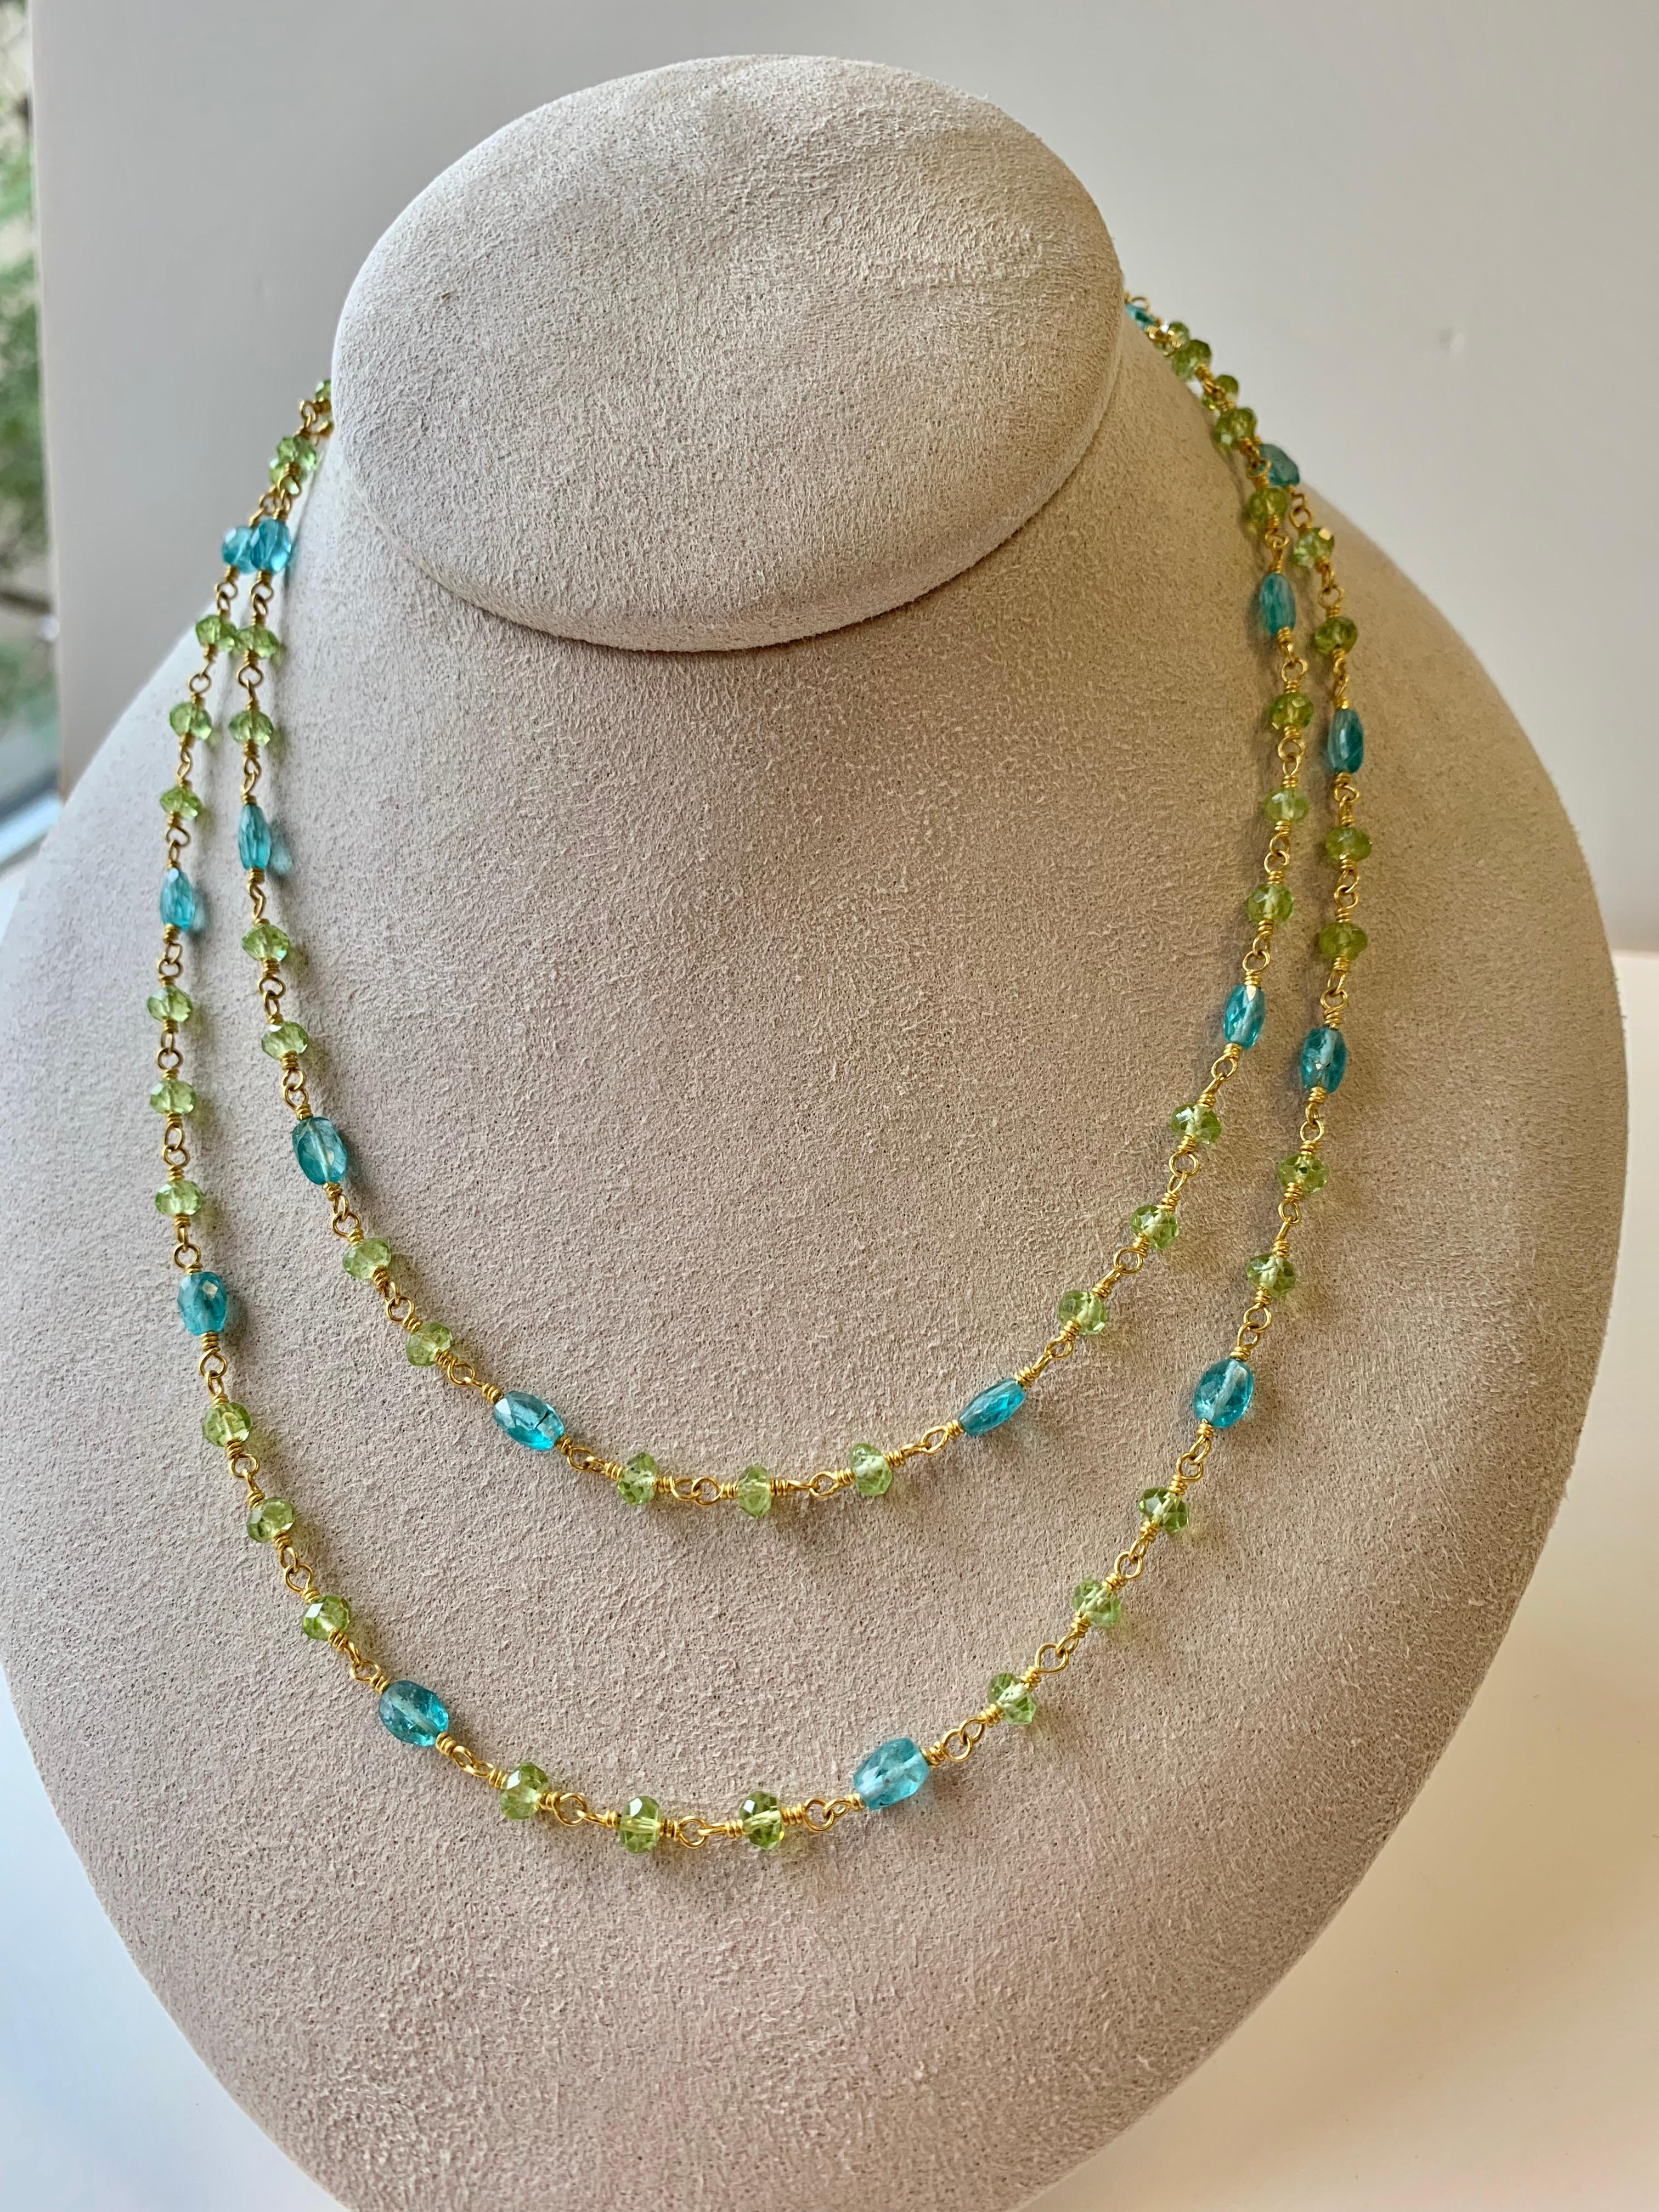 Long necklace-sautoir 34.75 inches of Peridot beads and Apatite beads very lively and colorful.
Hand made of 22 karat gold & 20 Karat gold. Can be worn either long or doubled up.
Can also be worn coupled with long 22 Karat gold Sailor's knot chain